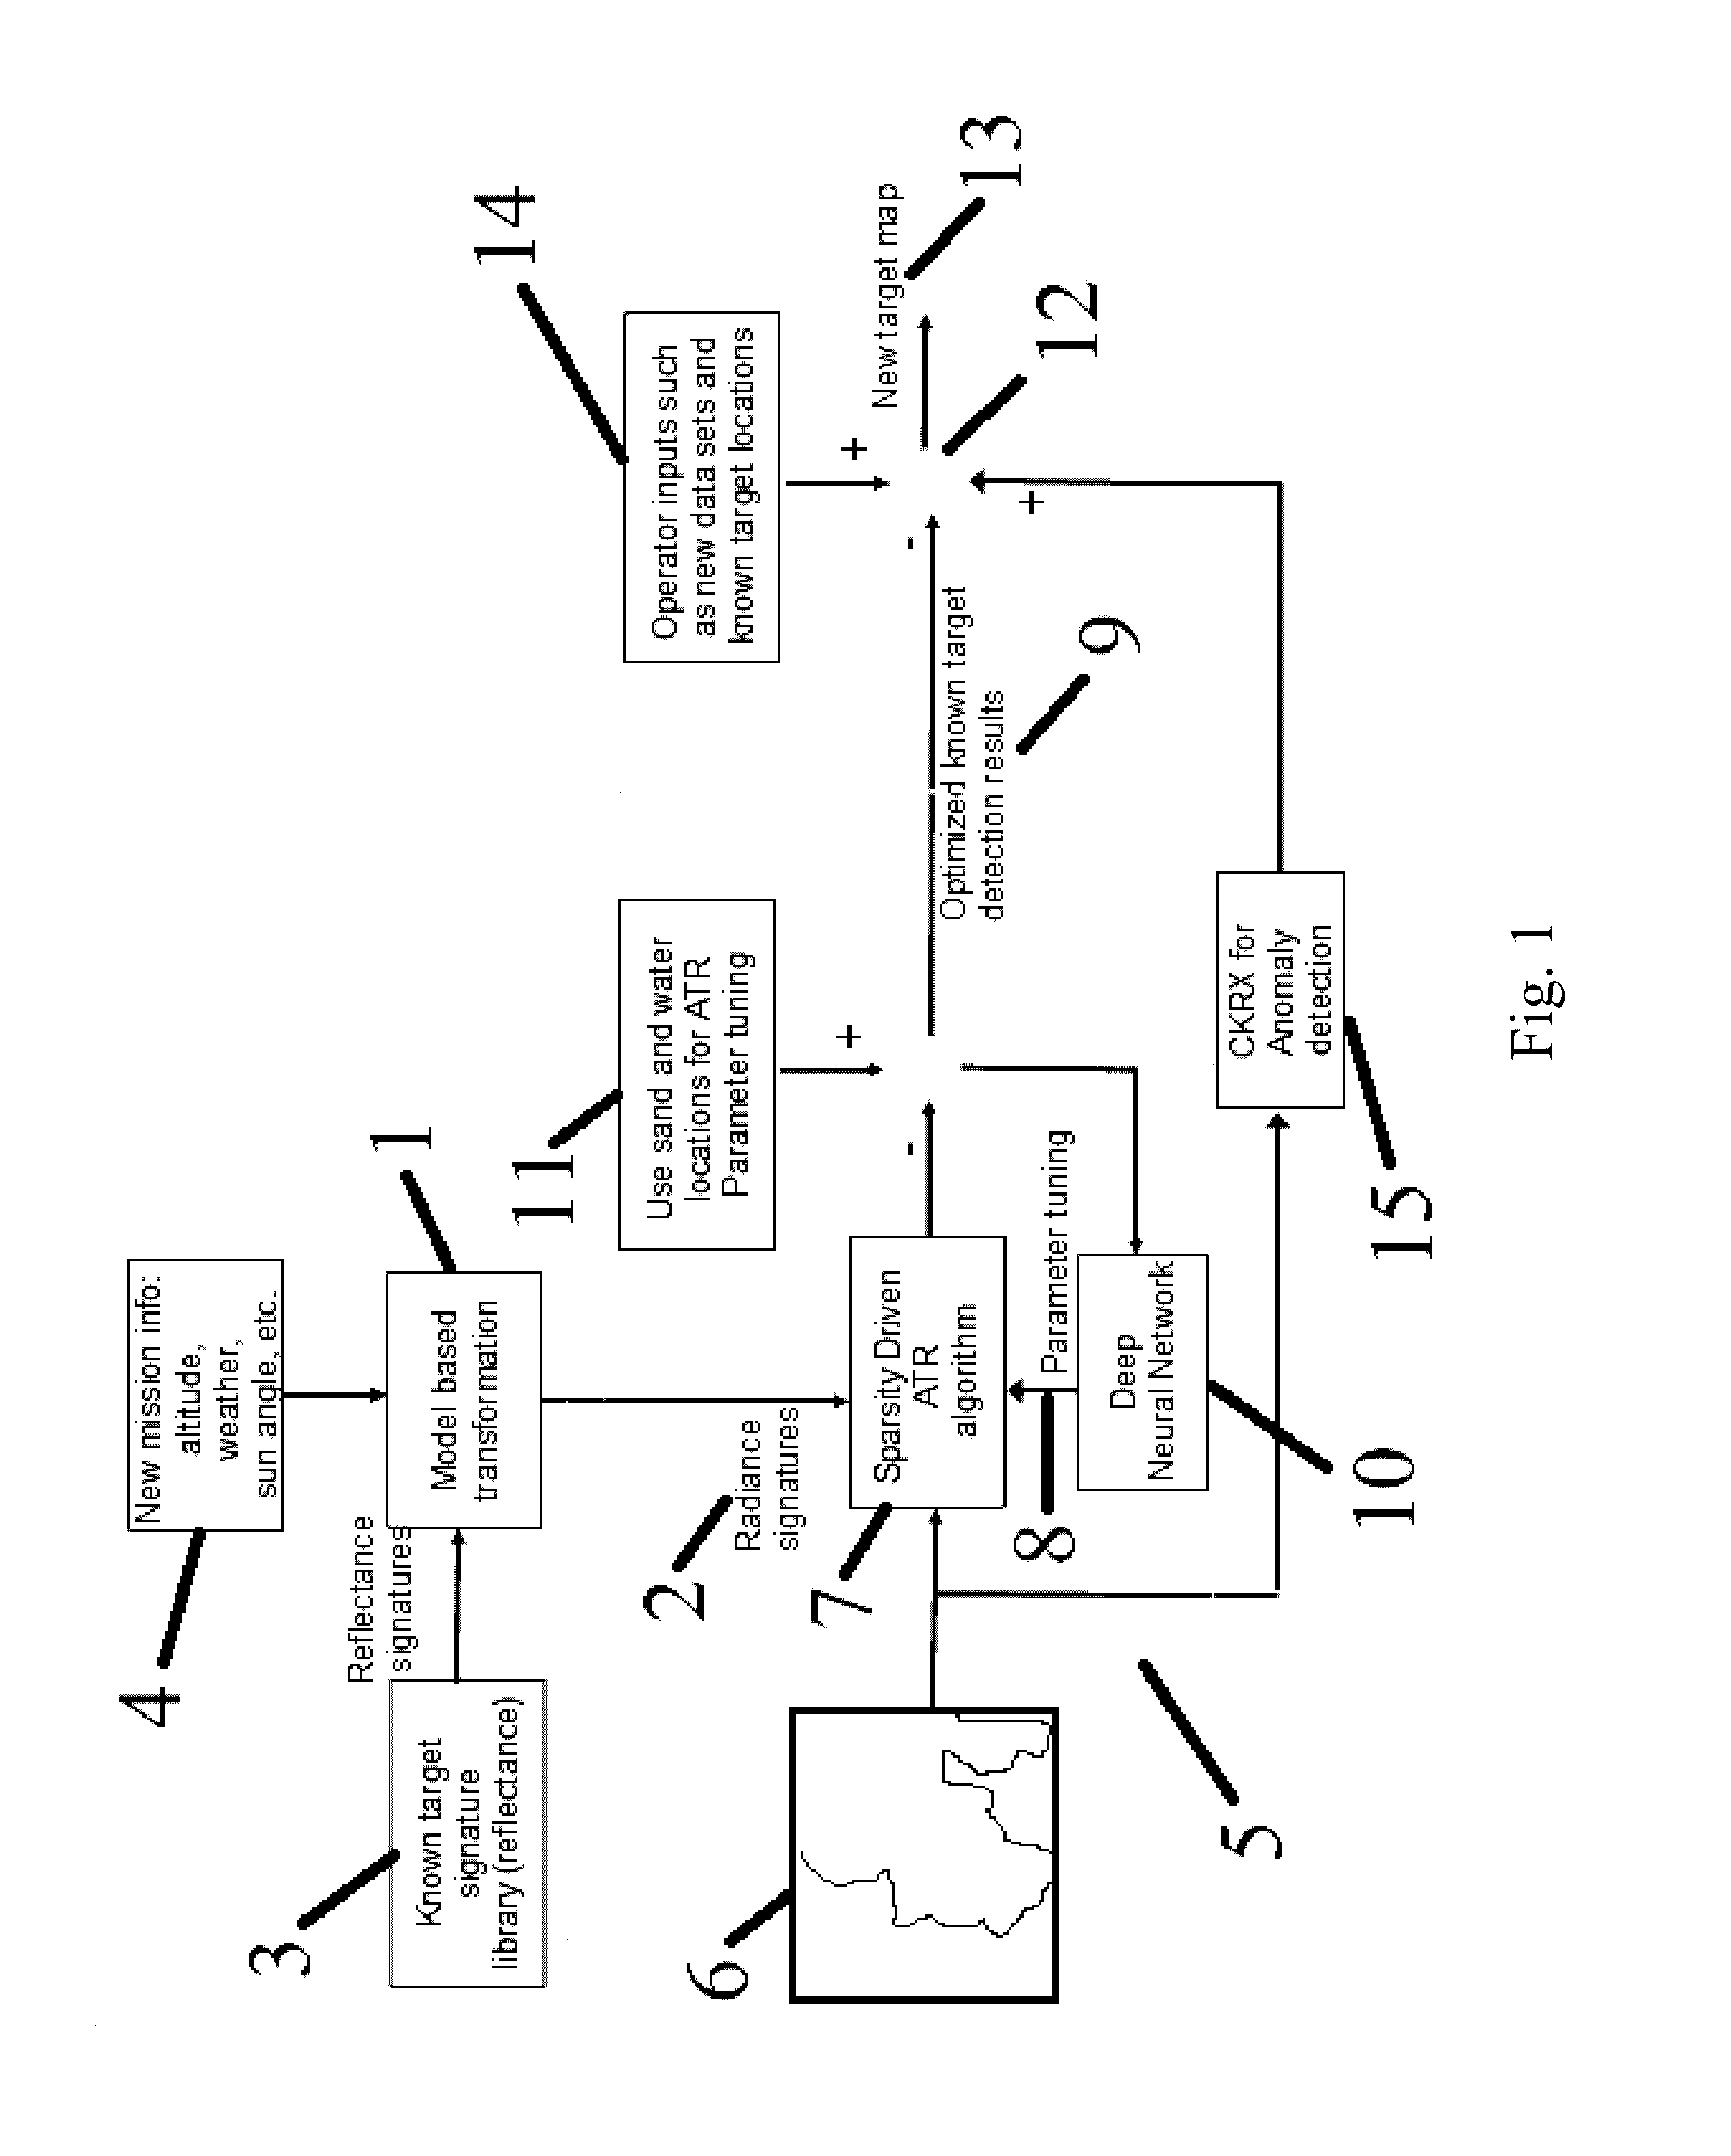 Automatic target recognition system with online machine learning capability